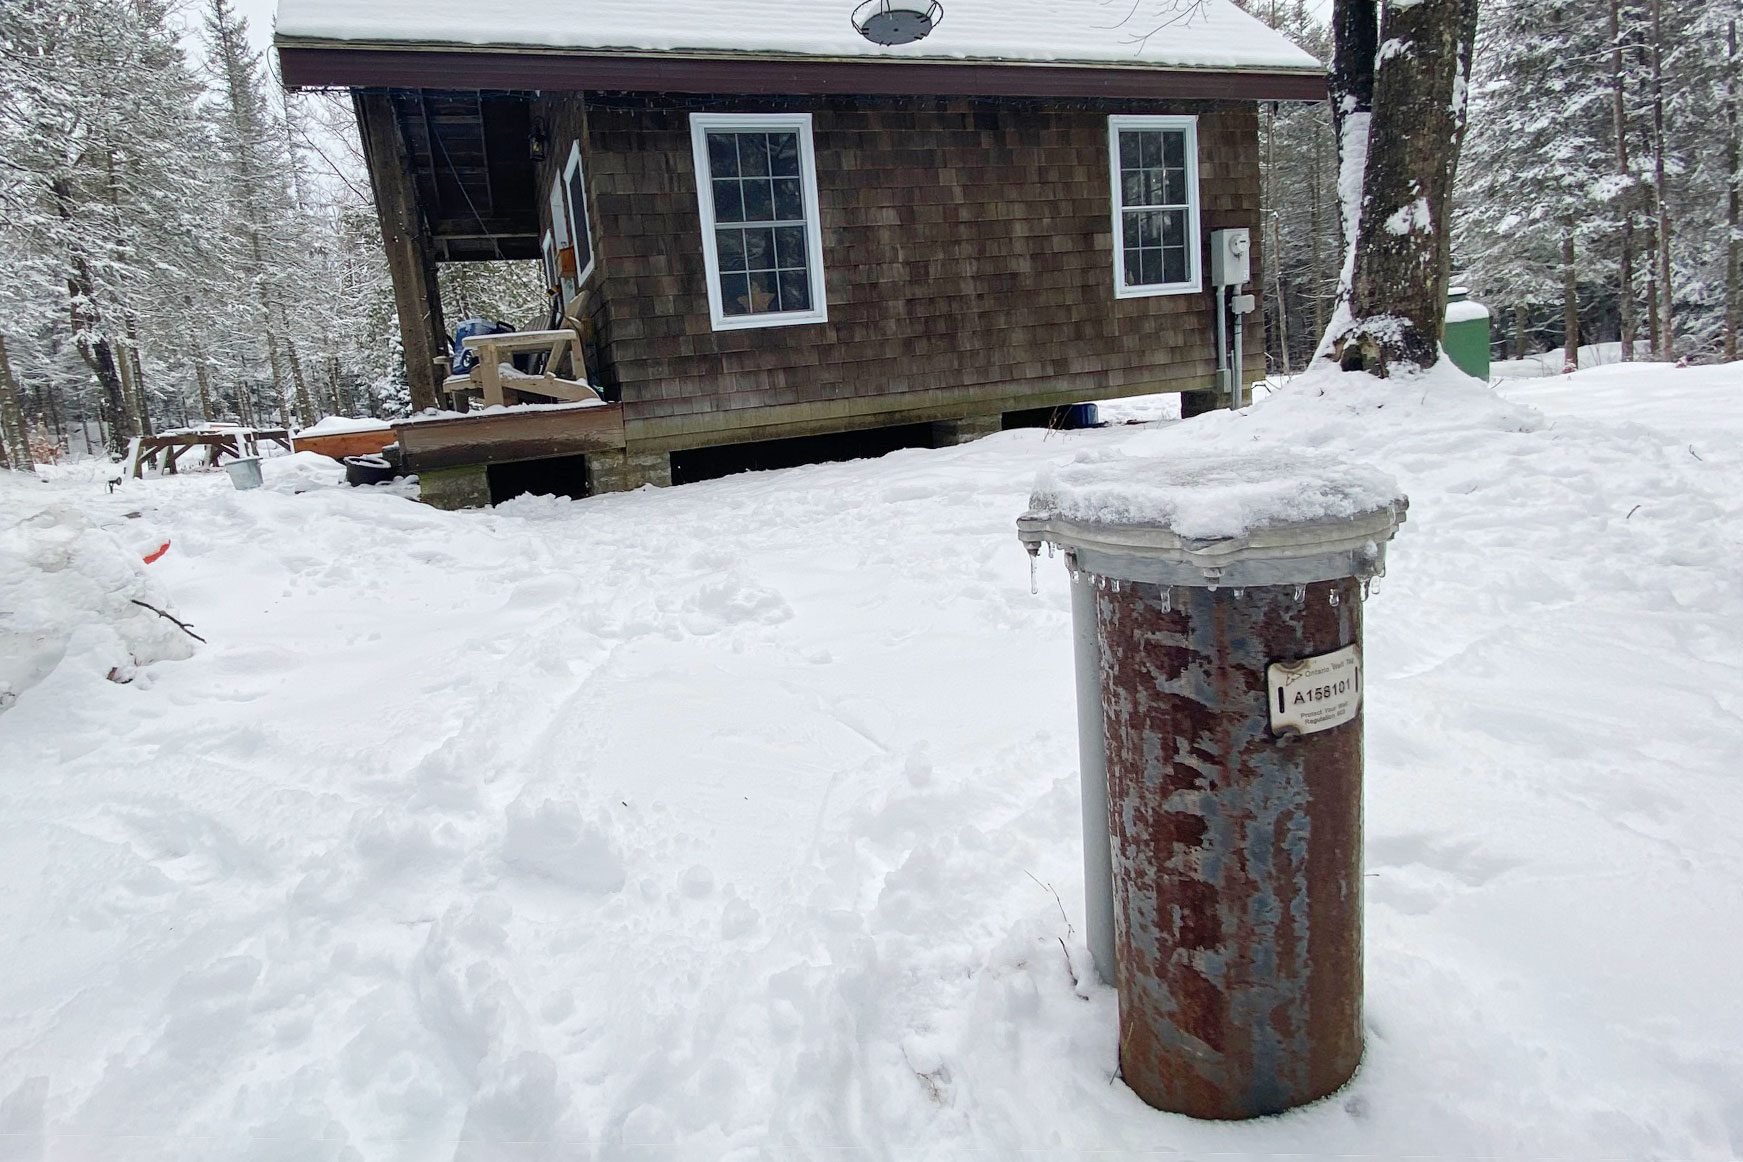 How To Keep Above-Ground Water Systems from Freezing